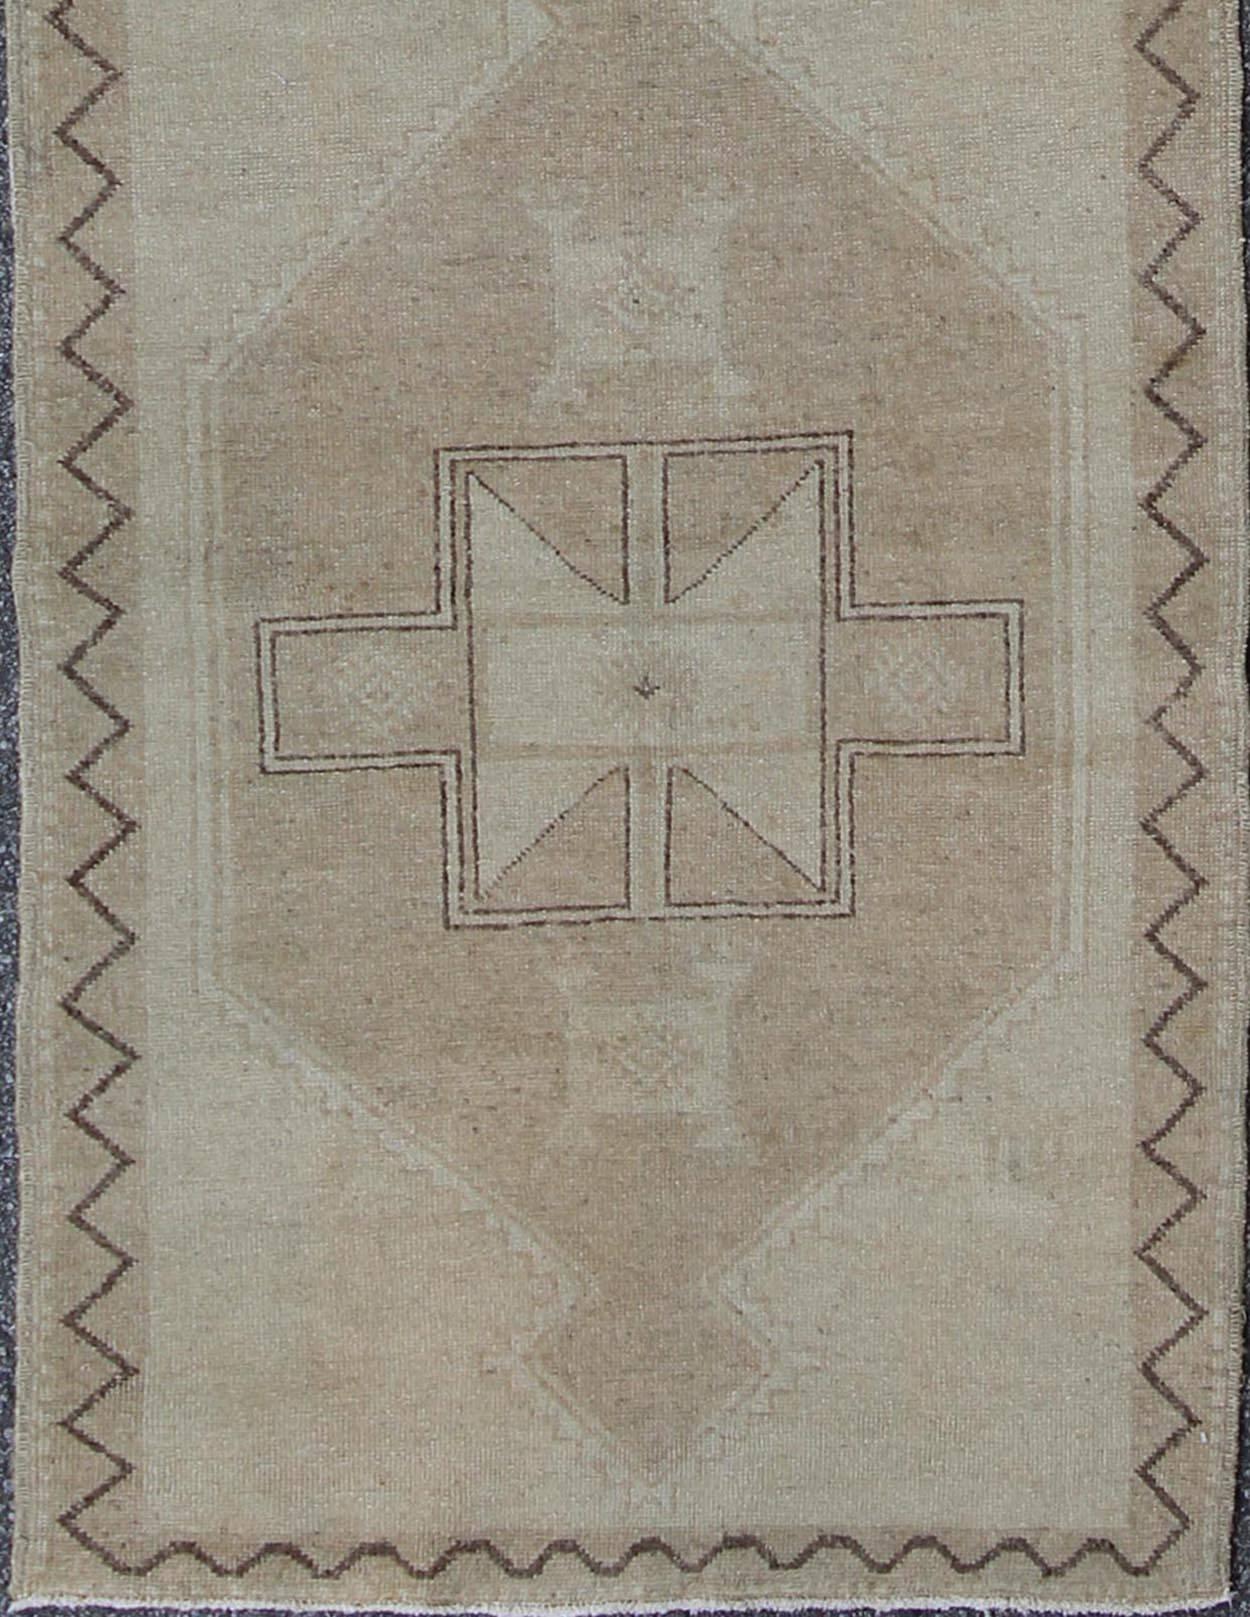 This Oushak runner presents three unique medallions laid out across a solid beige field. Each medallion contains a variation of taupe, beige, tan, cream, and brown, which blend together to accentuate its delicate geometrical design. A slightly